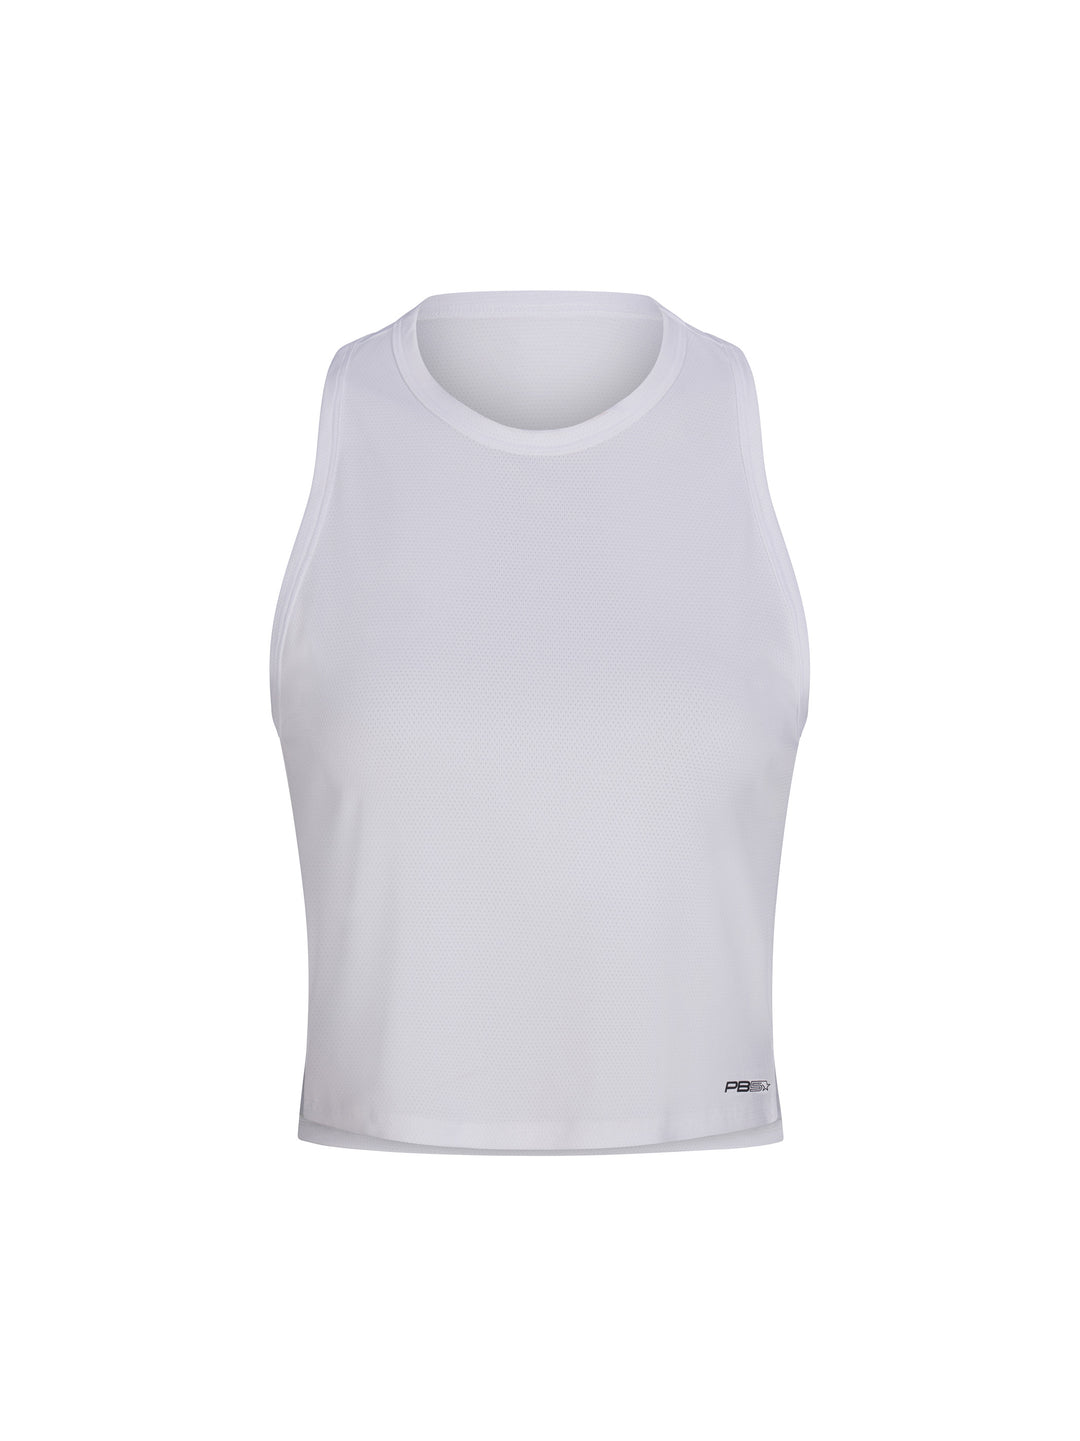 Women's Cropped Racer Back Tank front view in white with high neck line. Small logo on lower left side.